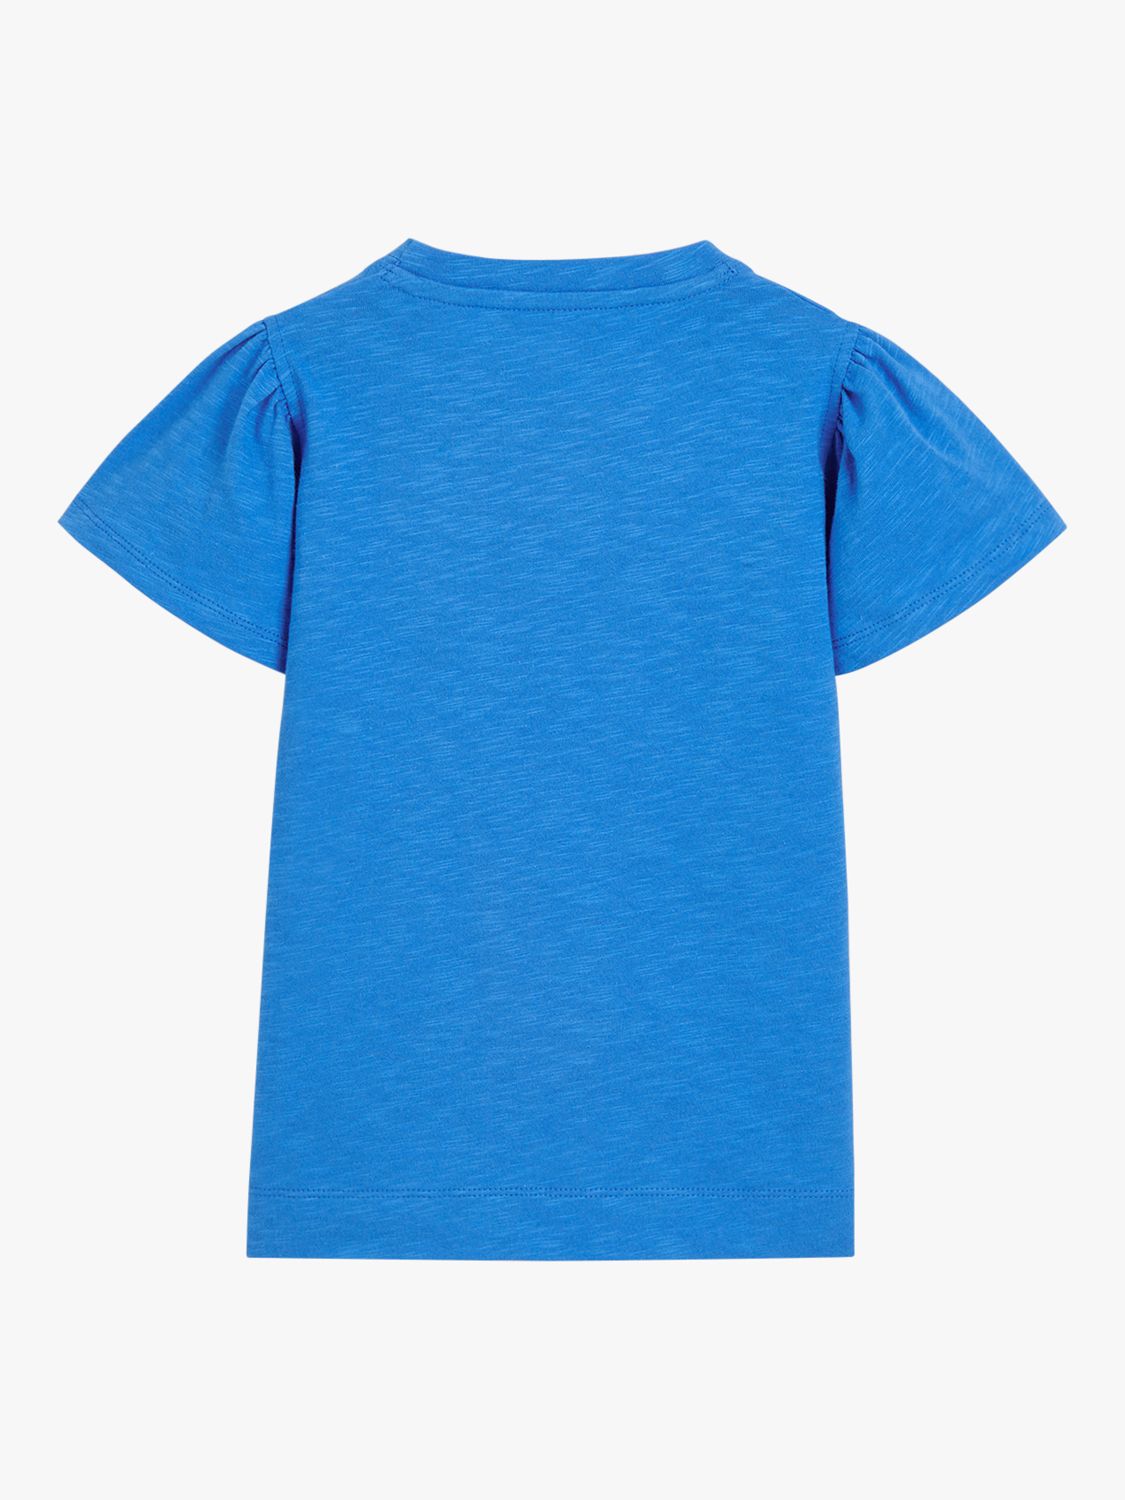 Whistles Kids' Frill Sleeve Plain Top, Blue, 3-4 years